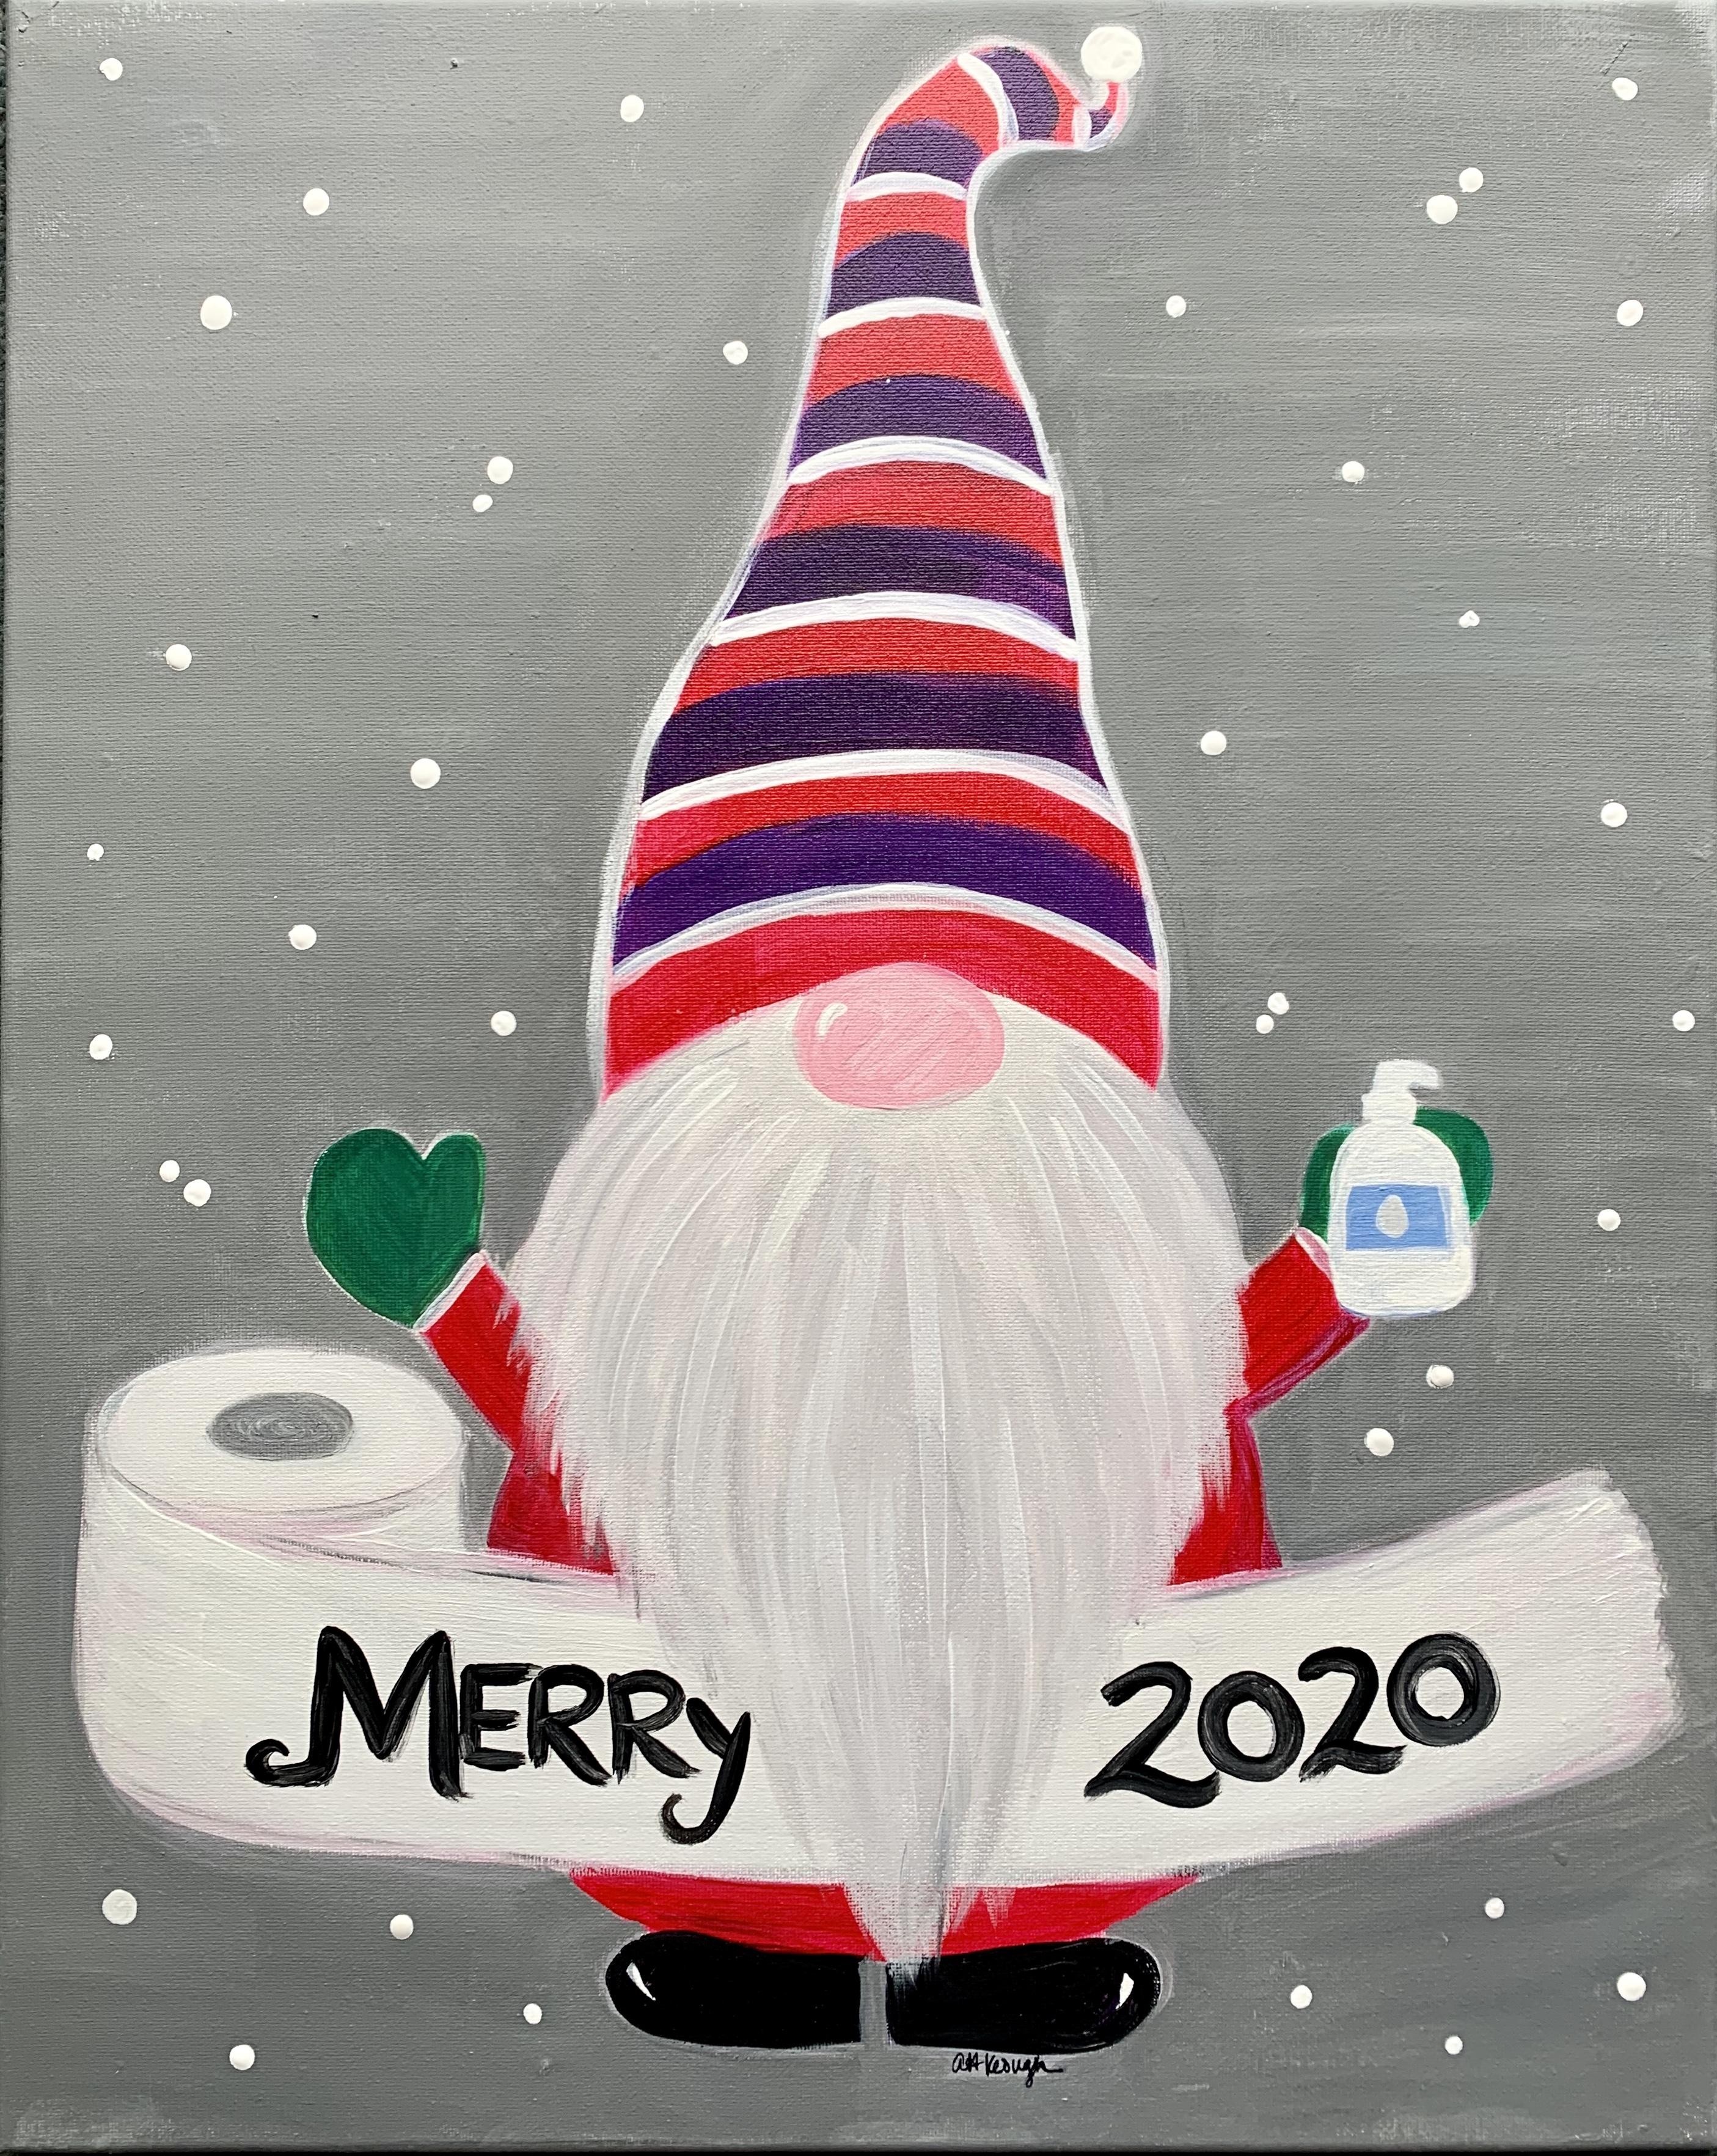 A Christmas Gnome 2020 experience project by Yaymaker